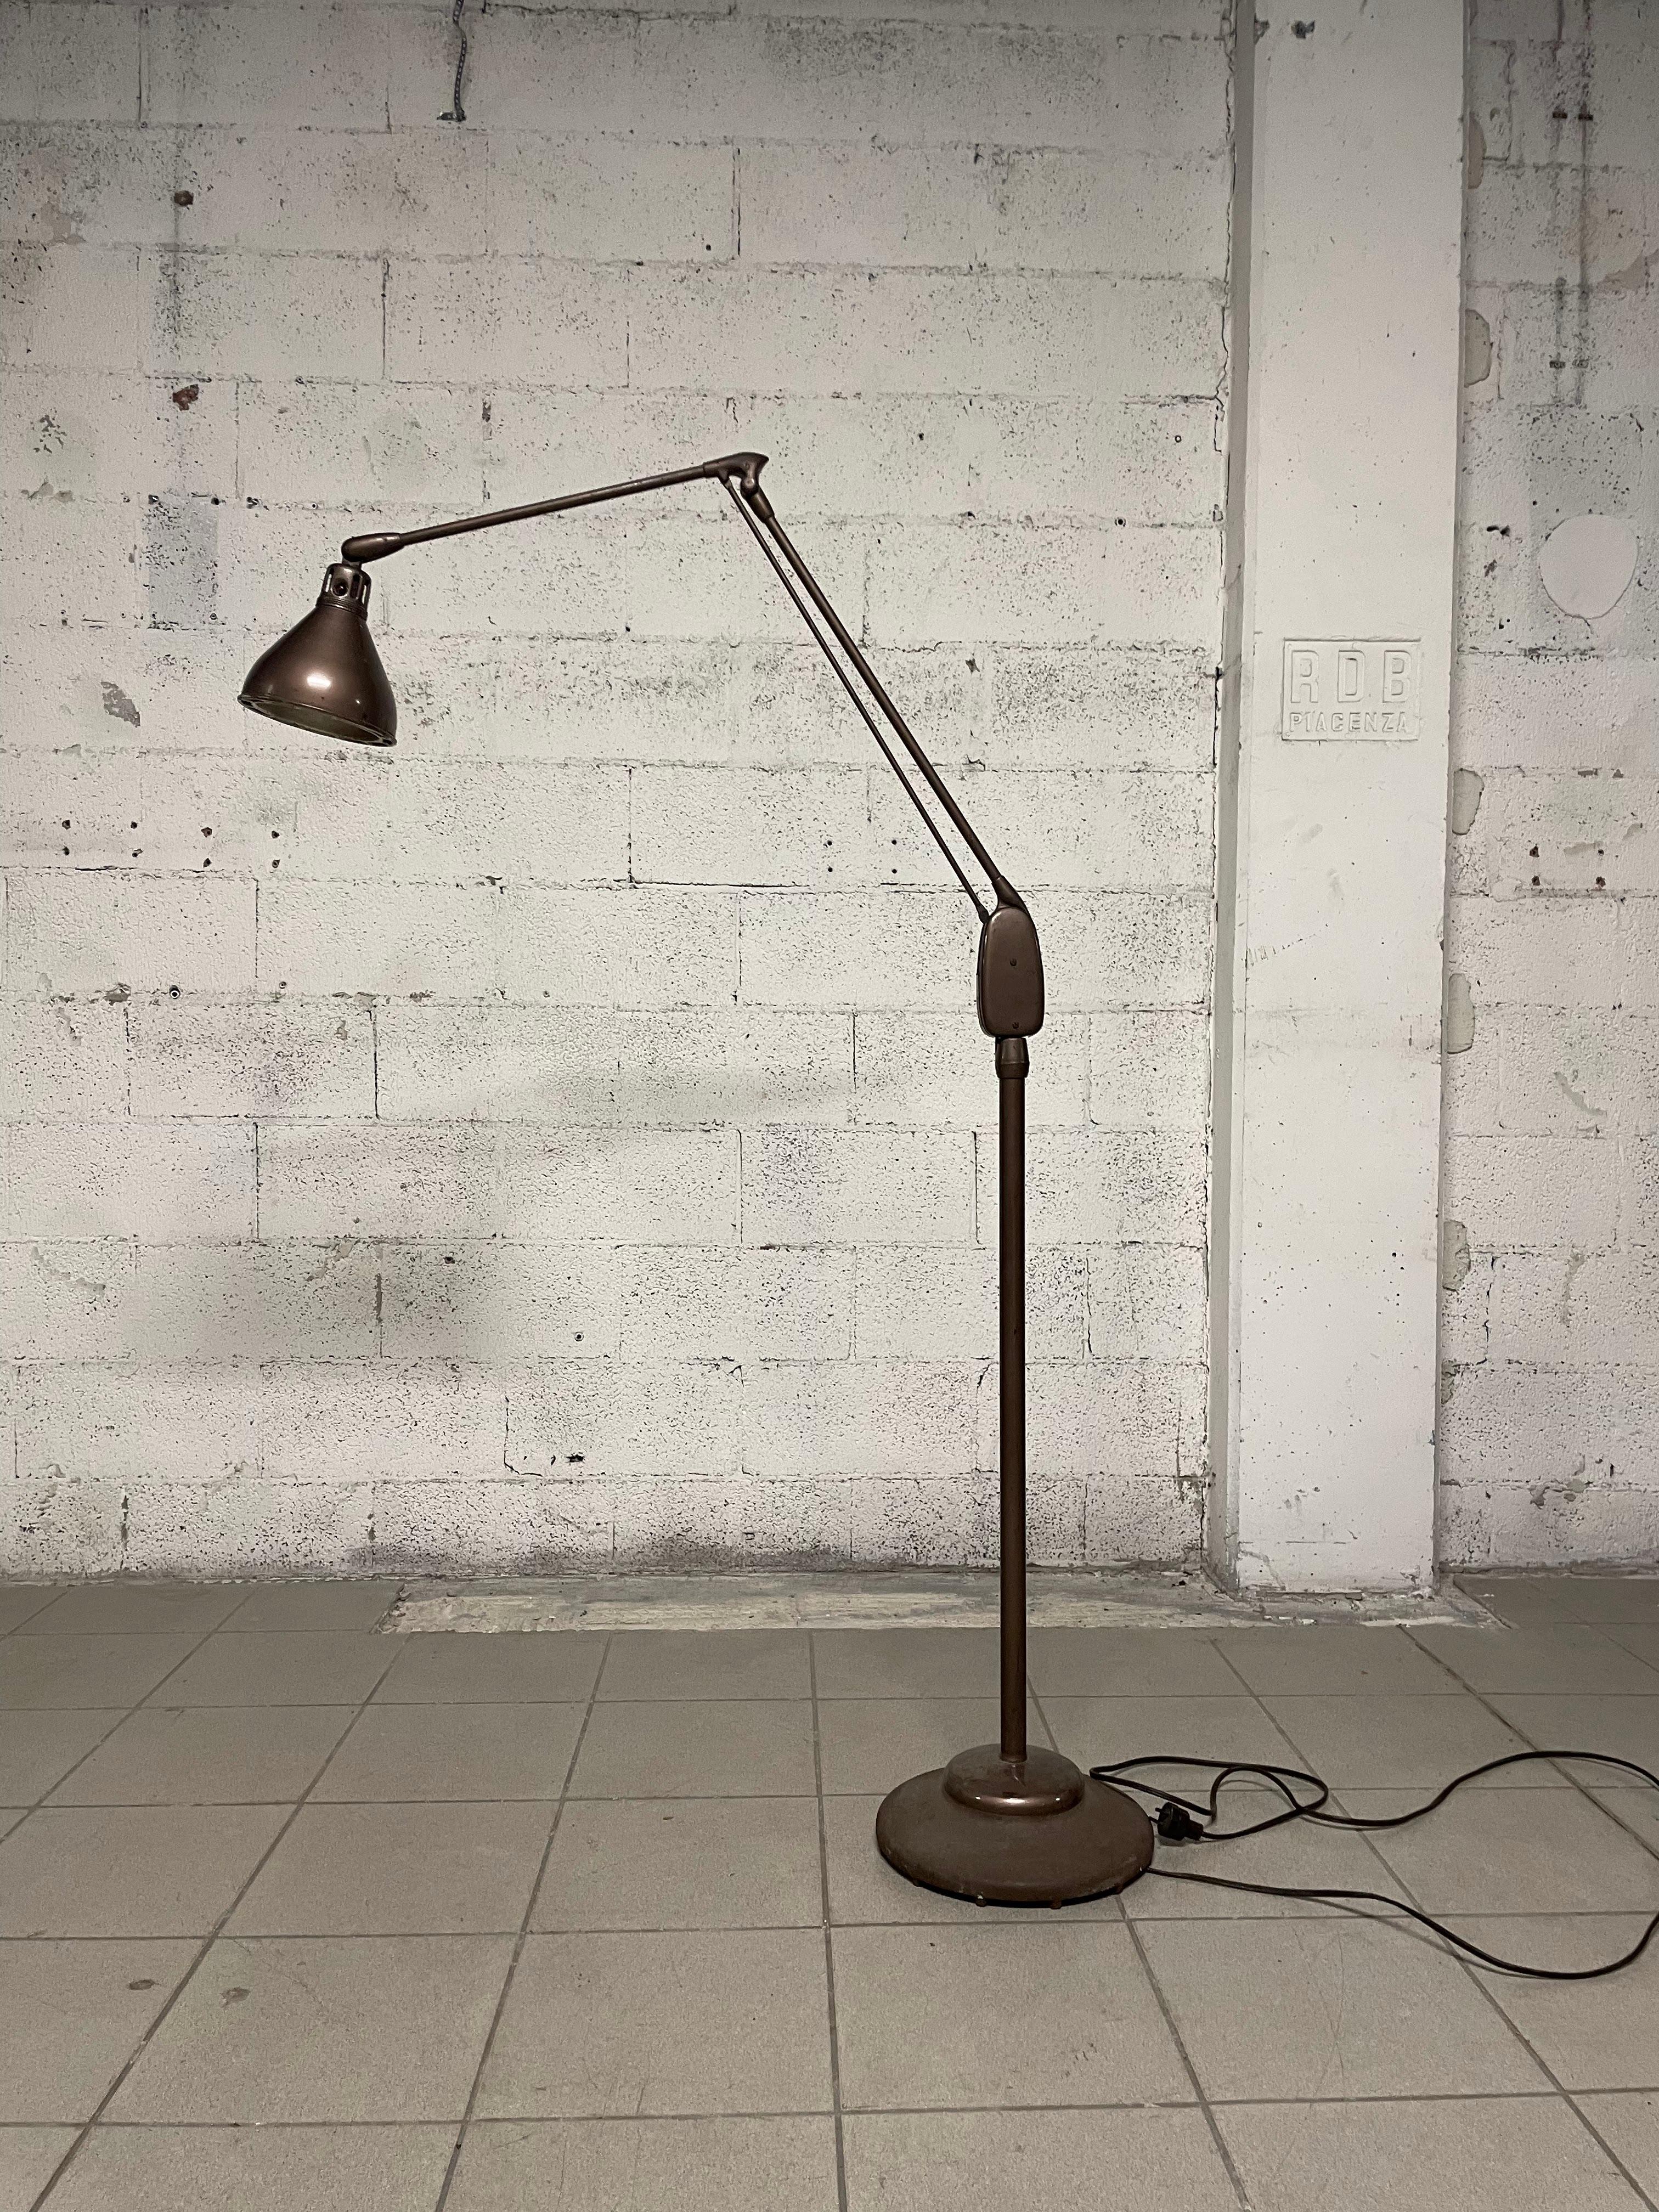 Industrial 1950s extendable floor lamp model 605 manufactured by Dazor MFG (USA).

Dazor is a historic U.S. lighting company founded in the 1930s and still in operation today.

The lamp comes with original wire, switch and plug; it has a dent on the